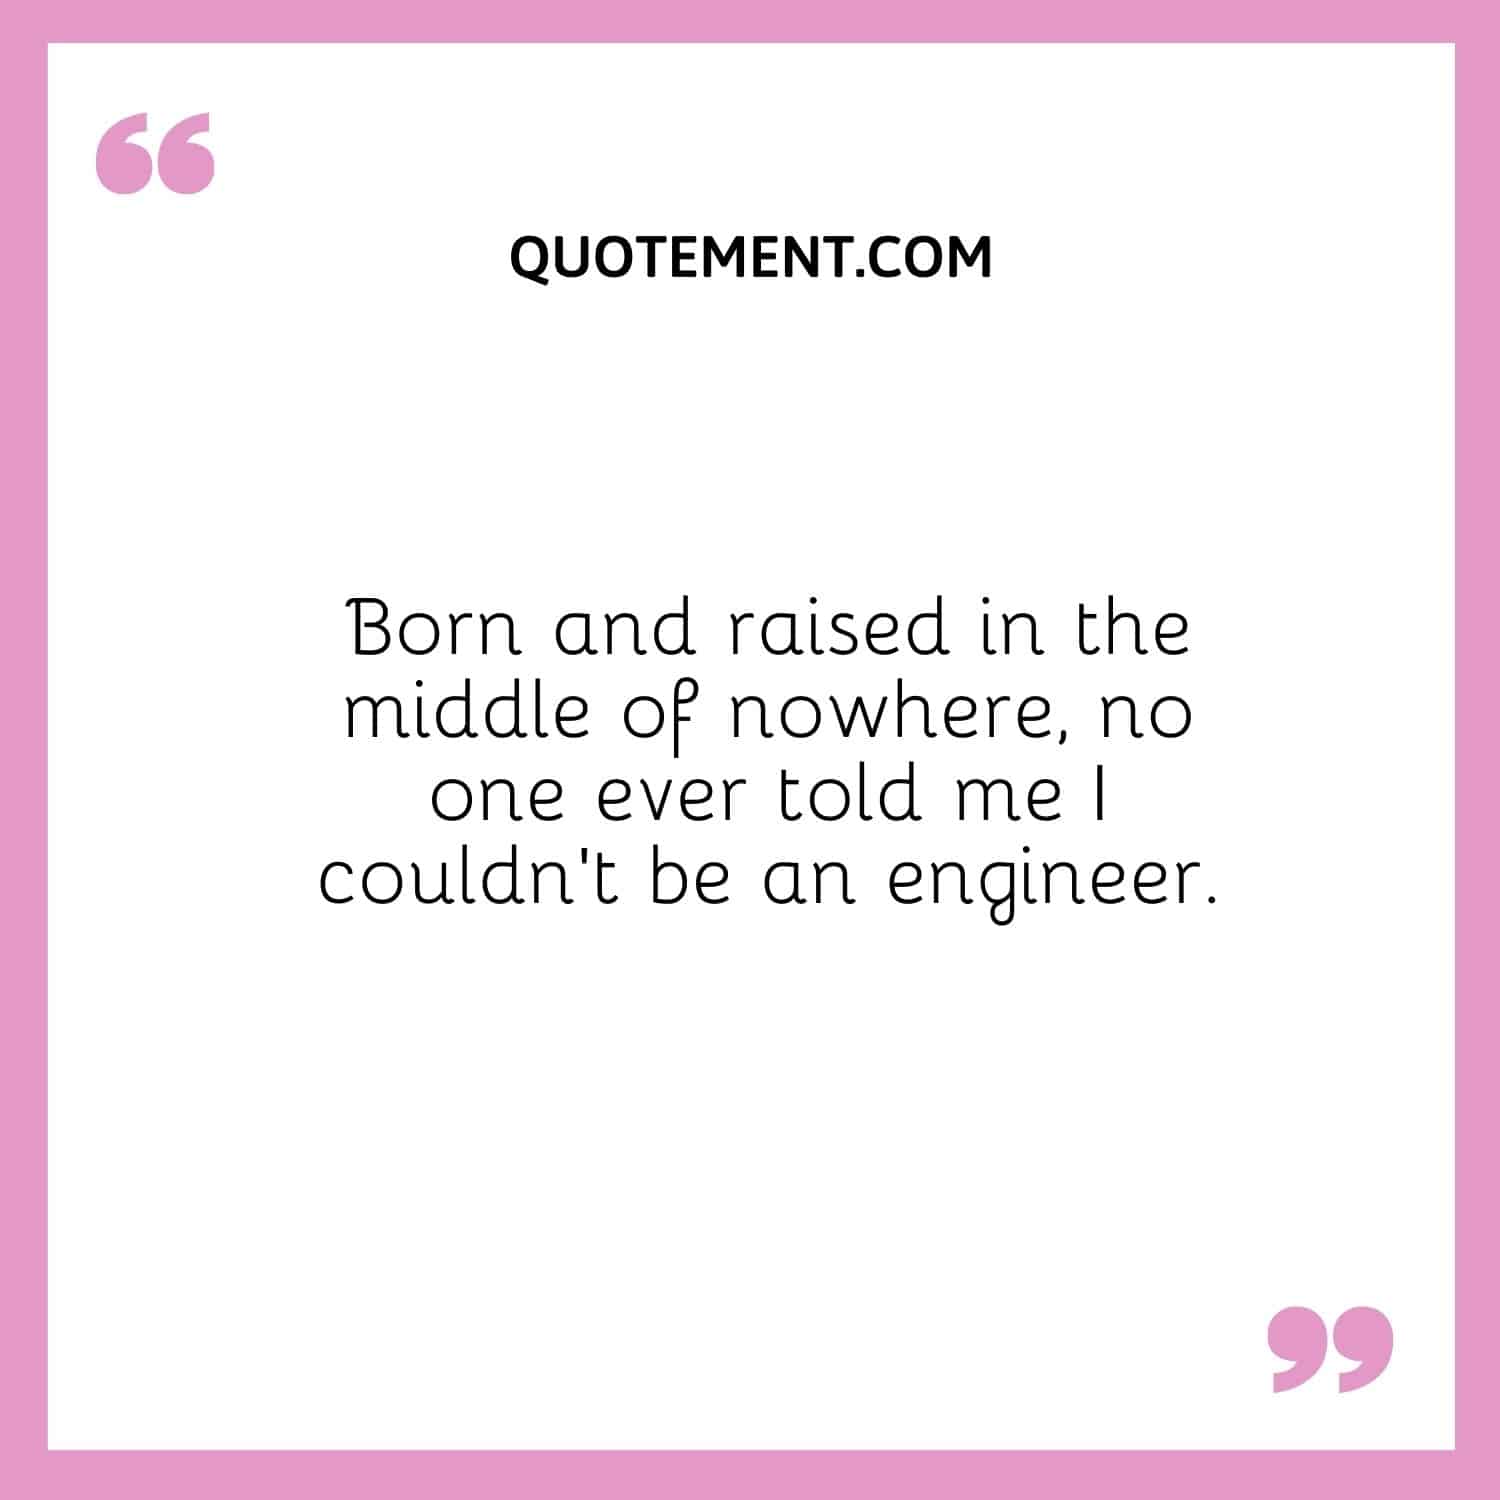 Born and raised in the middle of nowhere, no one ever told me I couldn’t be an engineer.